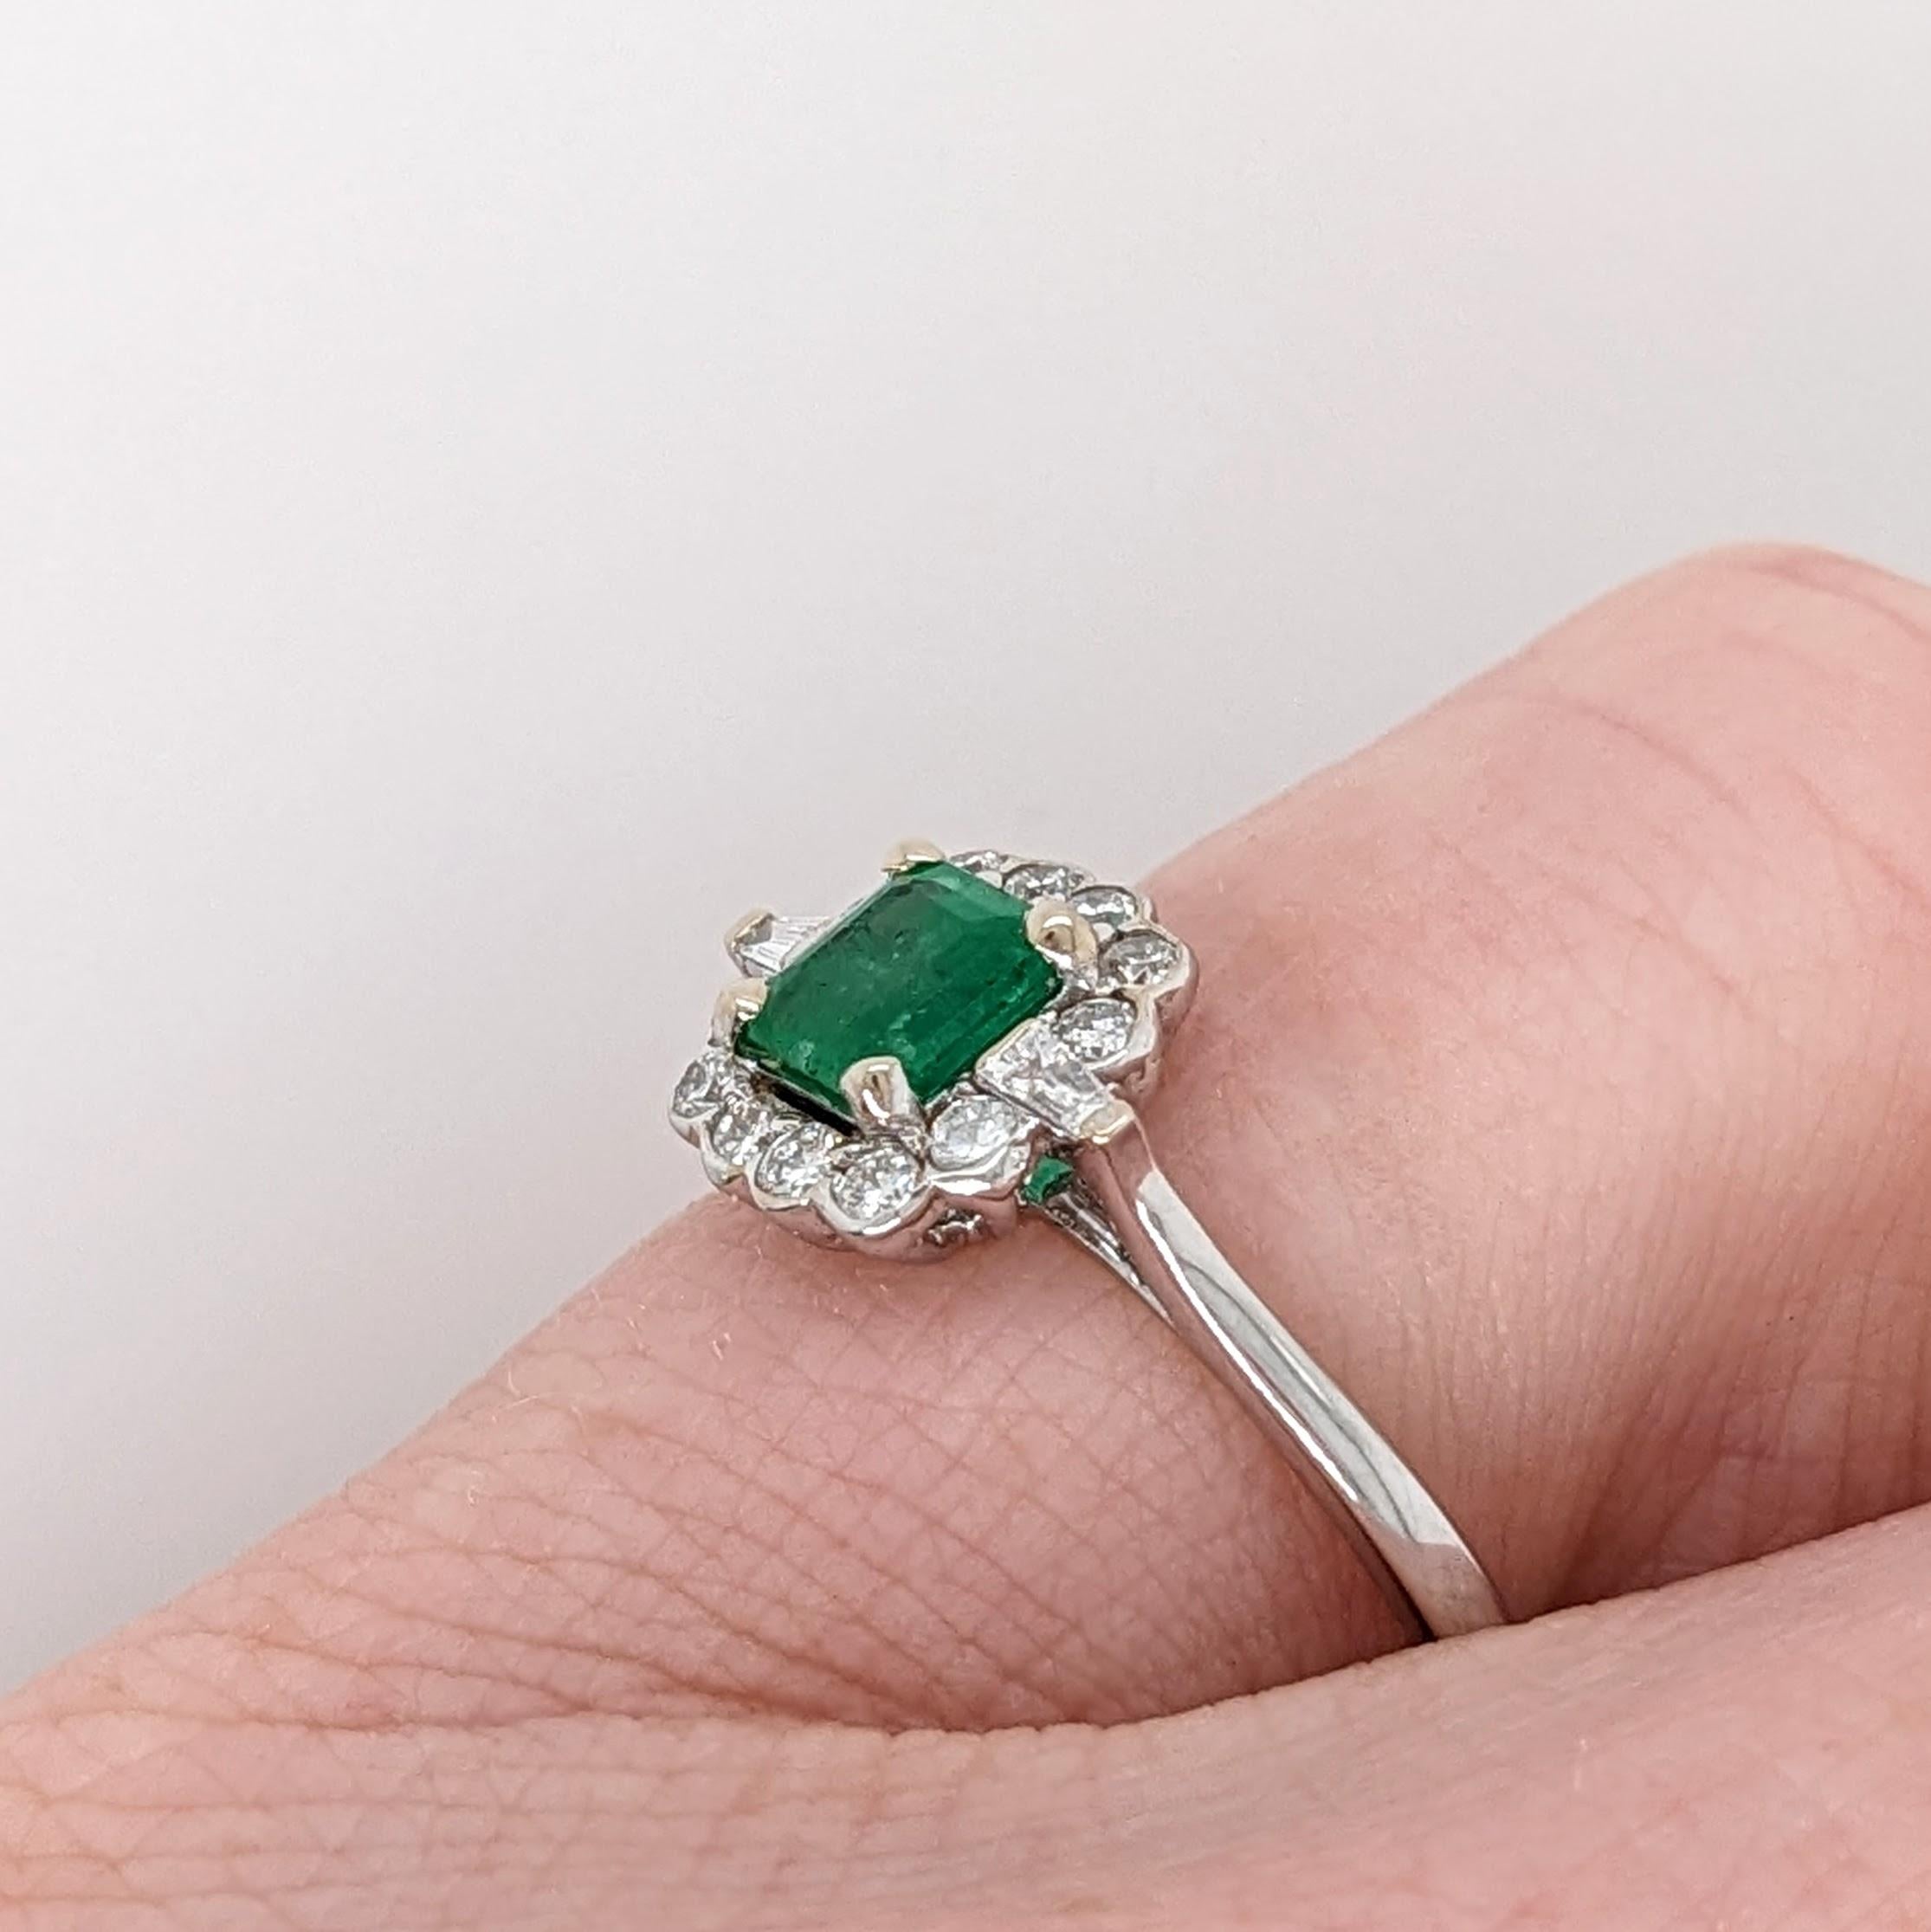 Emerald w Diamond Halo & Tapered Baguette Accents in 14K Gold Emerald Cut 5mm 3